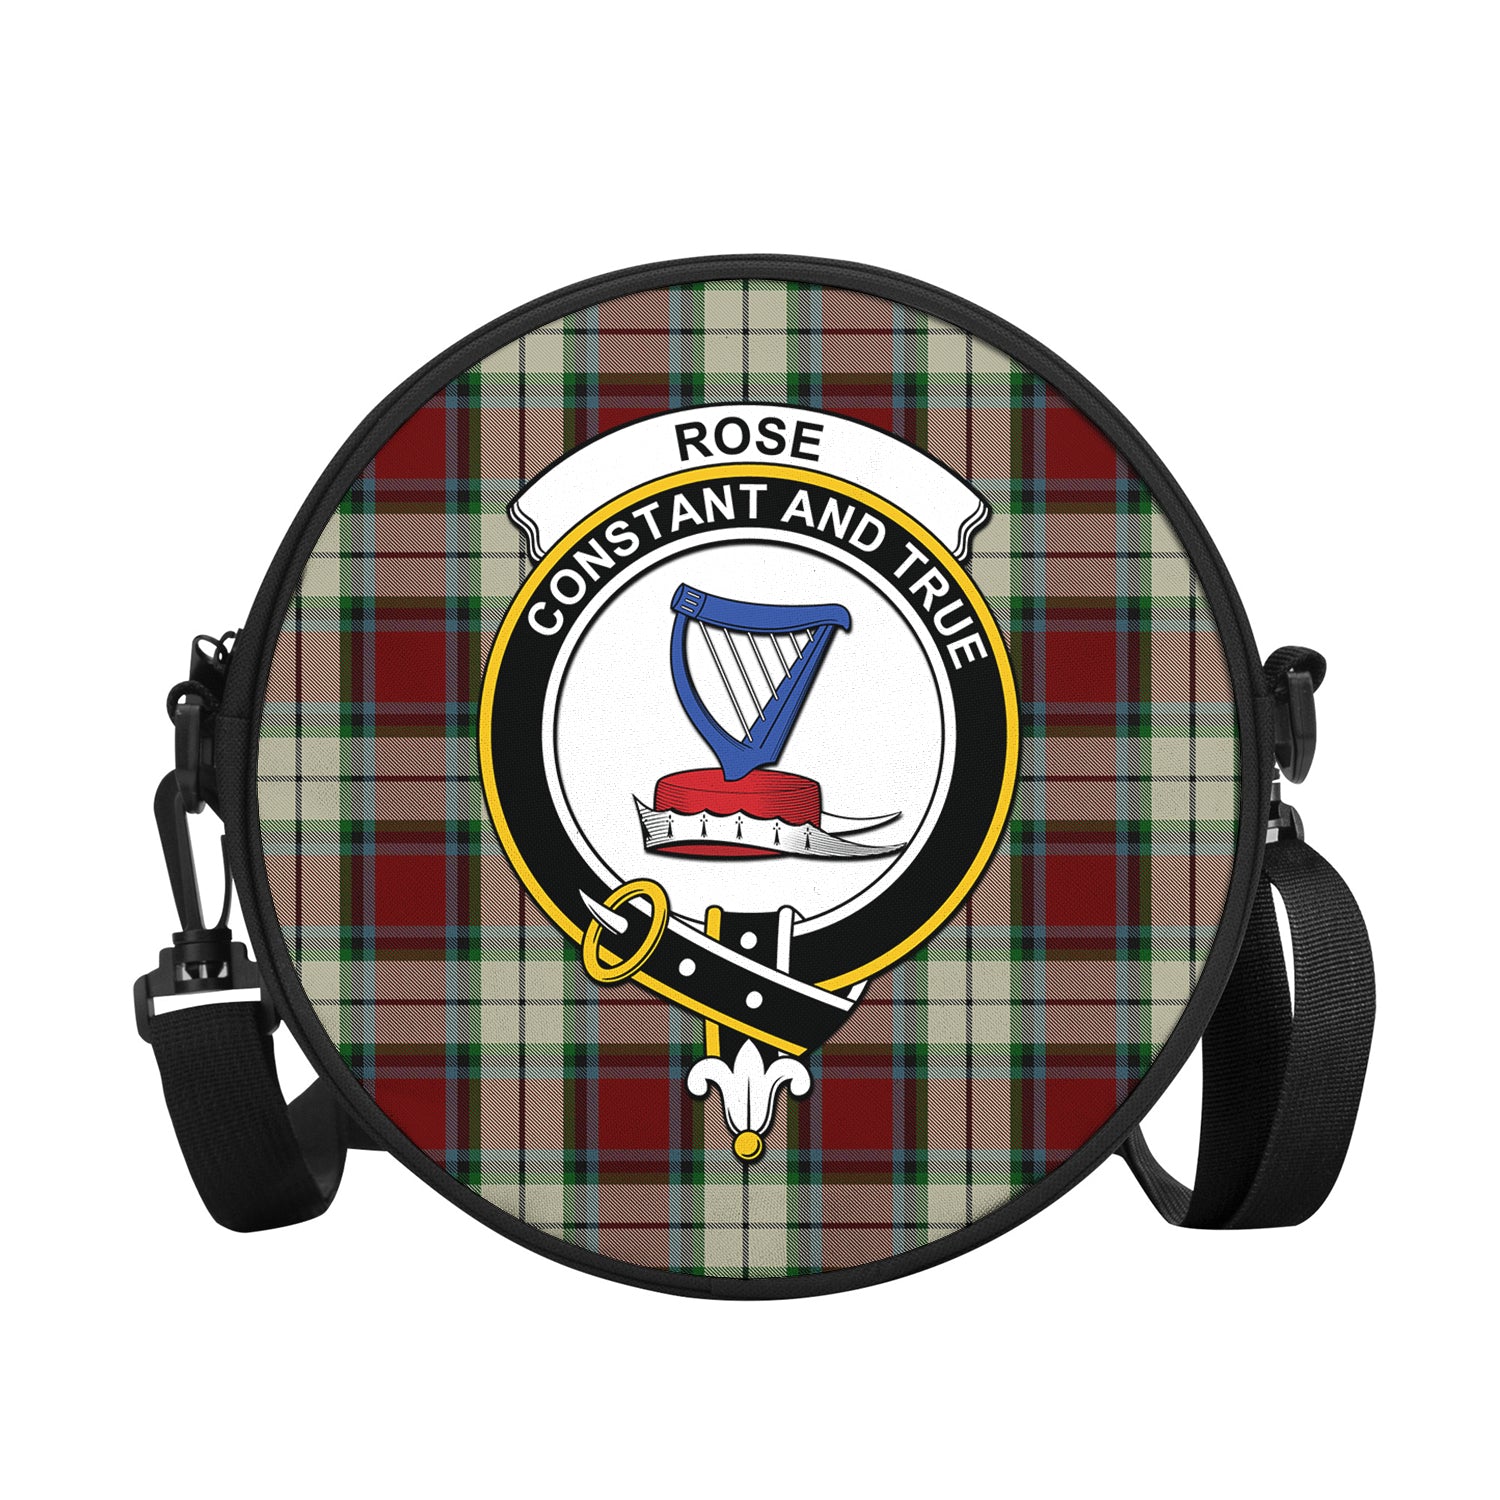 rose-white-dress-tartan-round-satchel-bags-with-family-crest